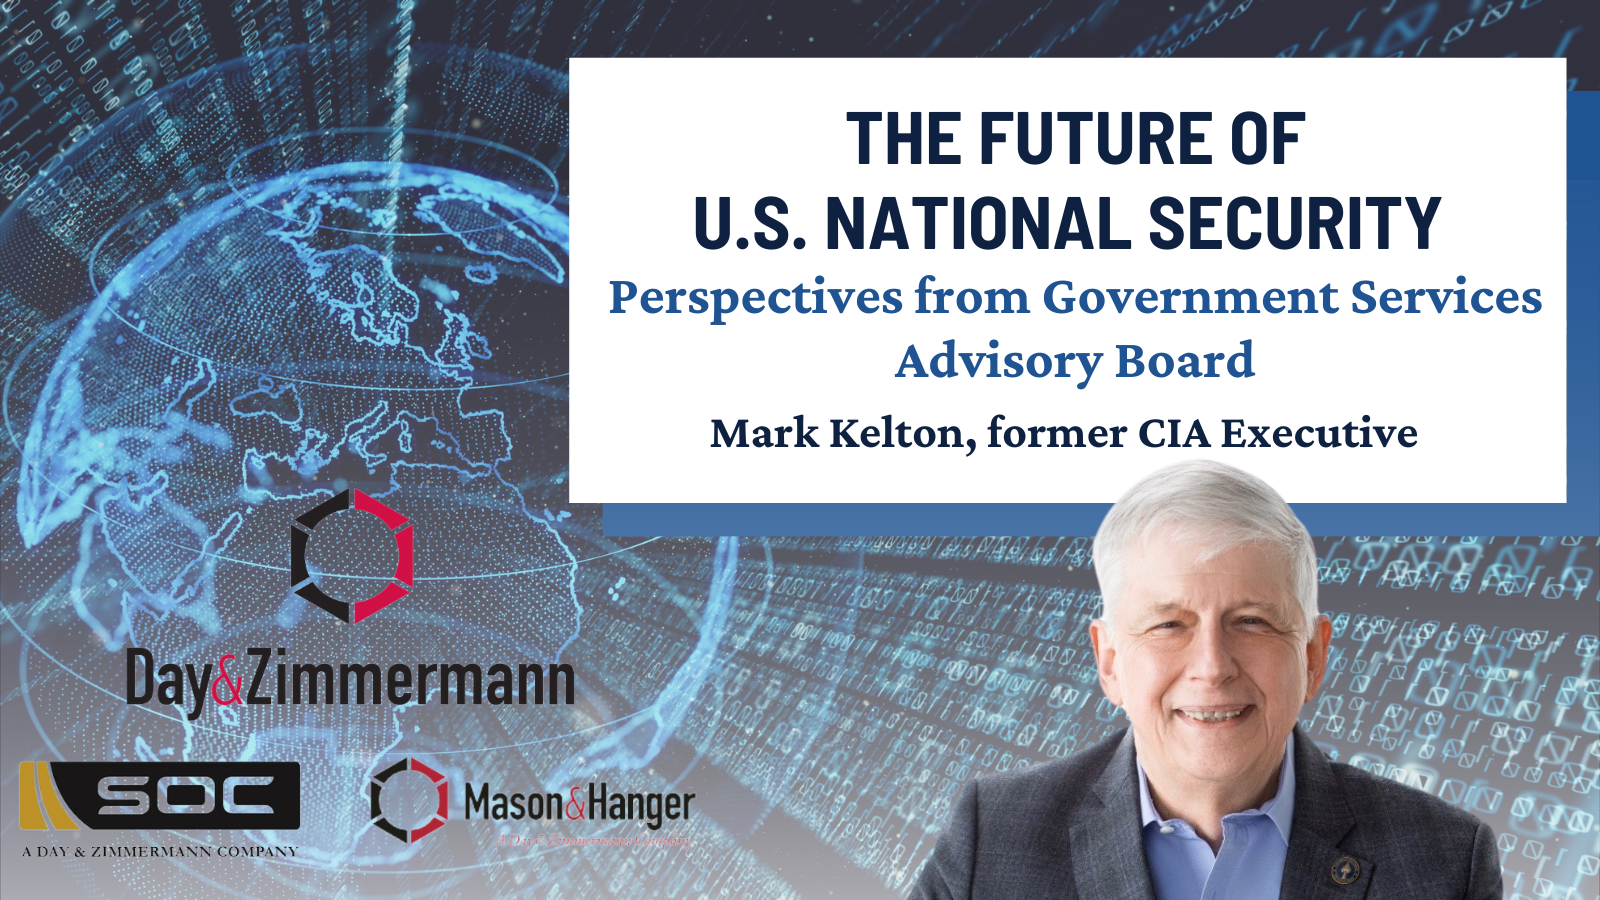 Video Series: The Future of U.S. National Security with Mark Kelton, Former CIA Executive